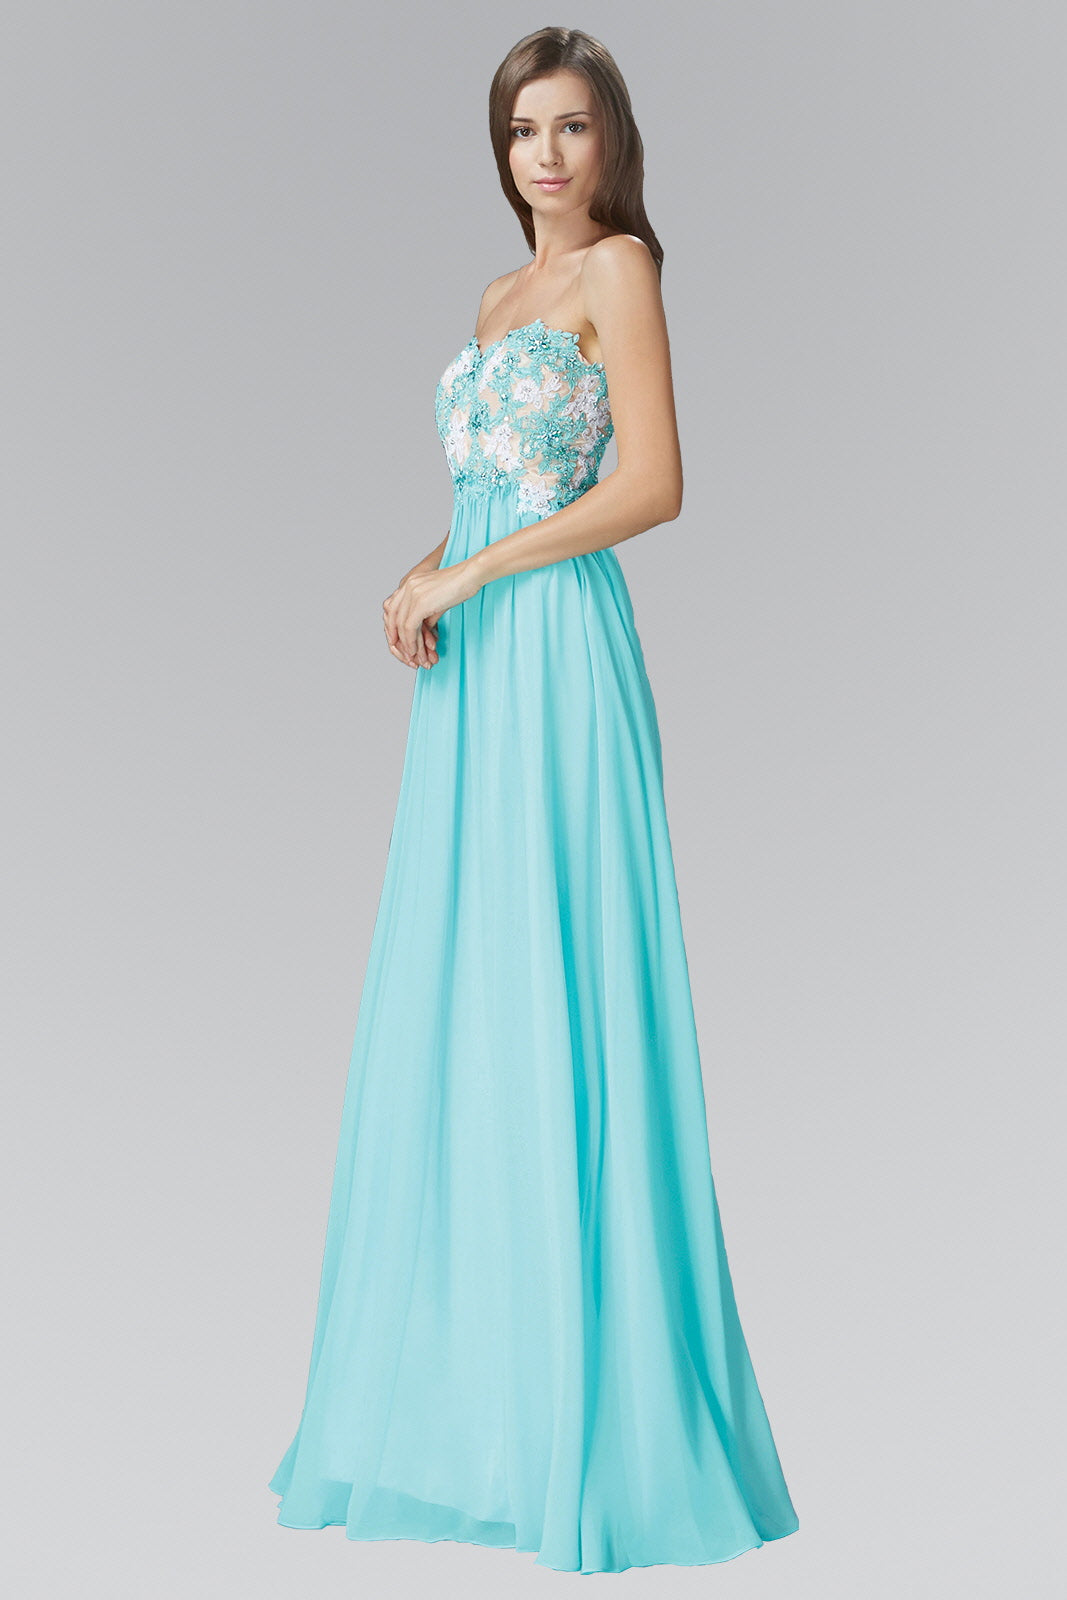 Strapless Sweetheart Chiffon Long Dress with Lace on Bodice-smcdress